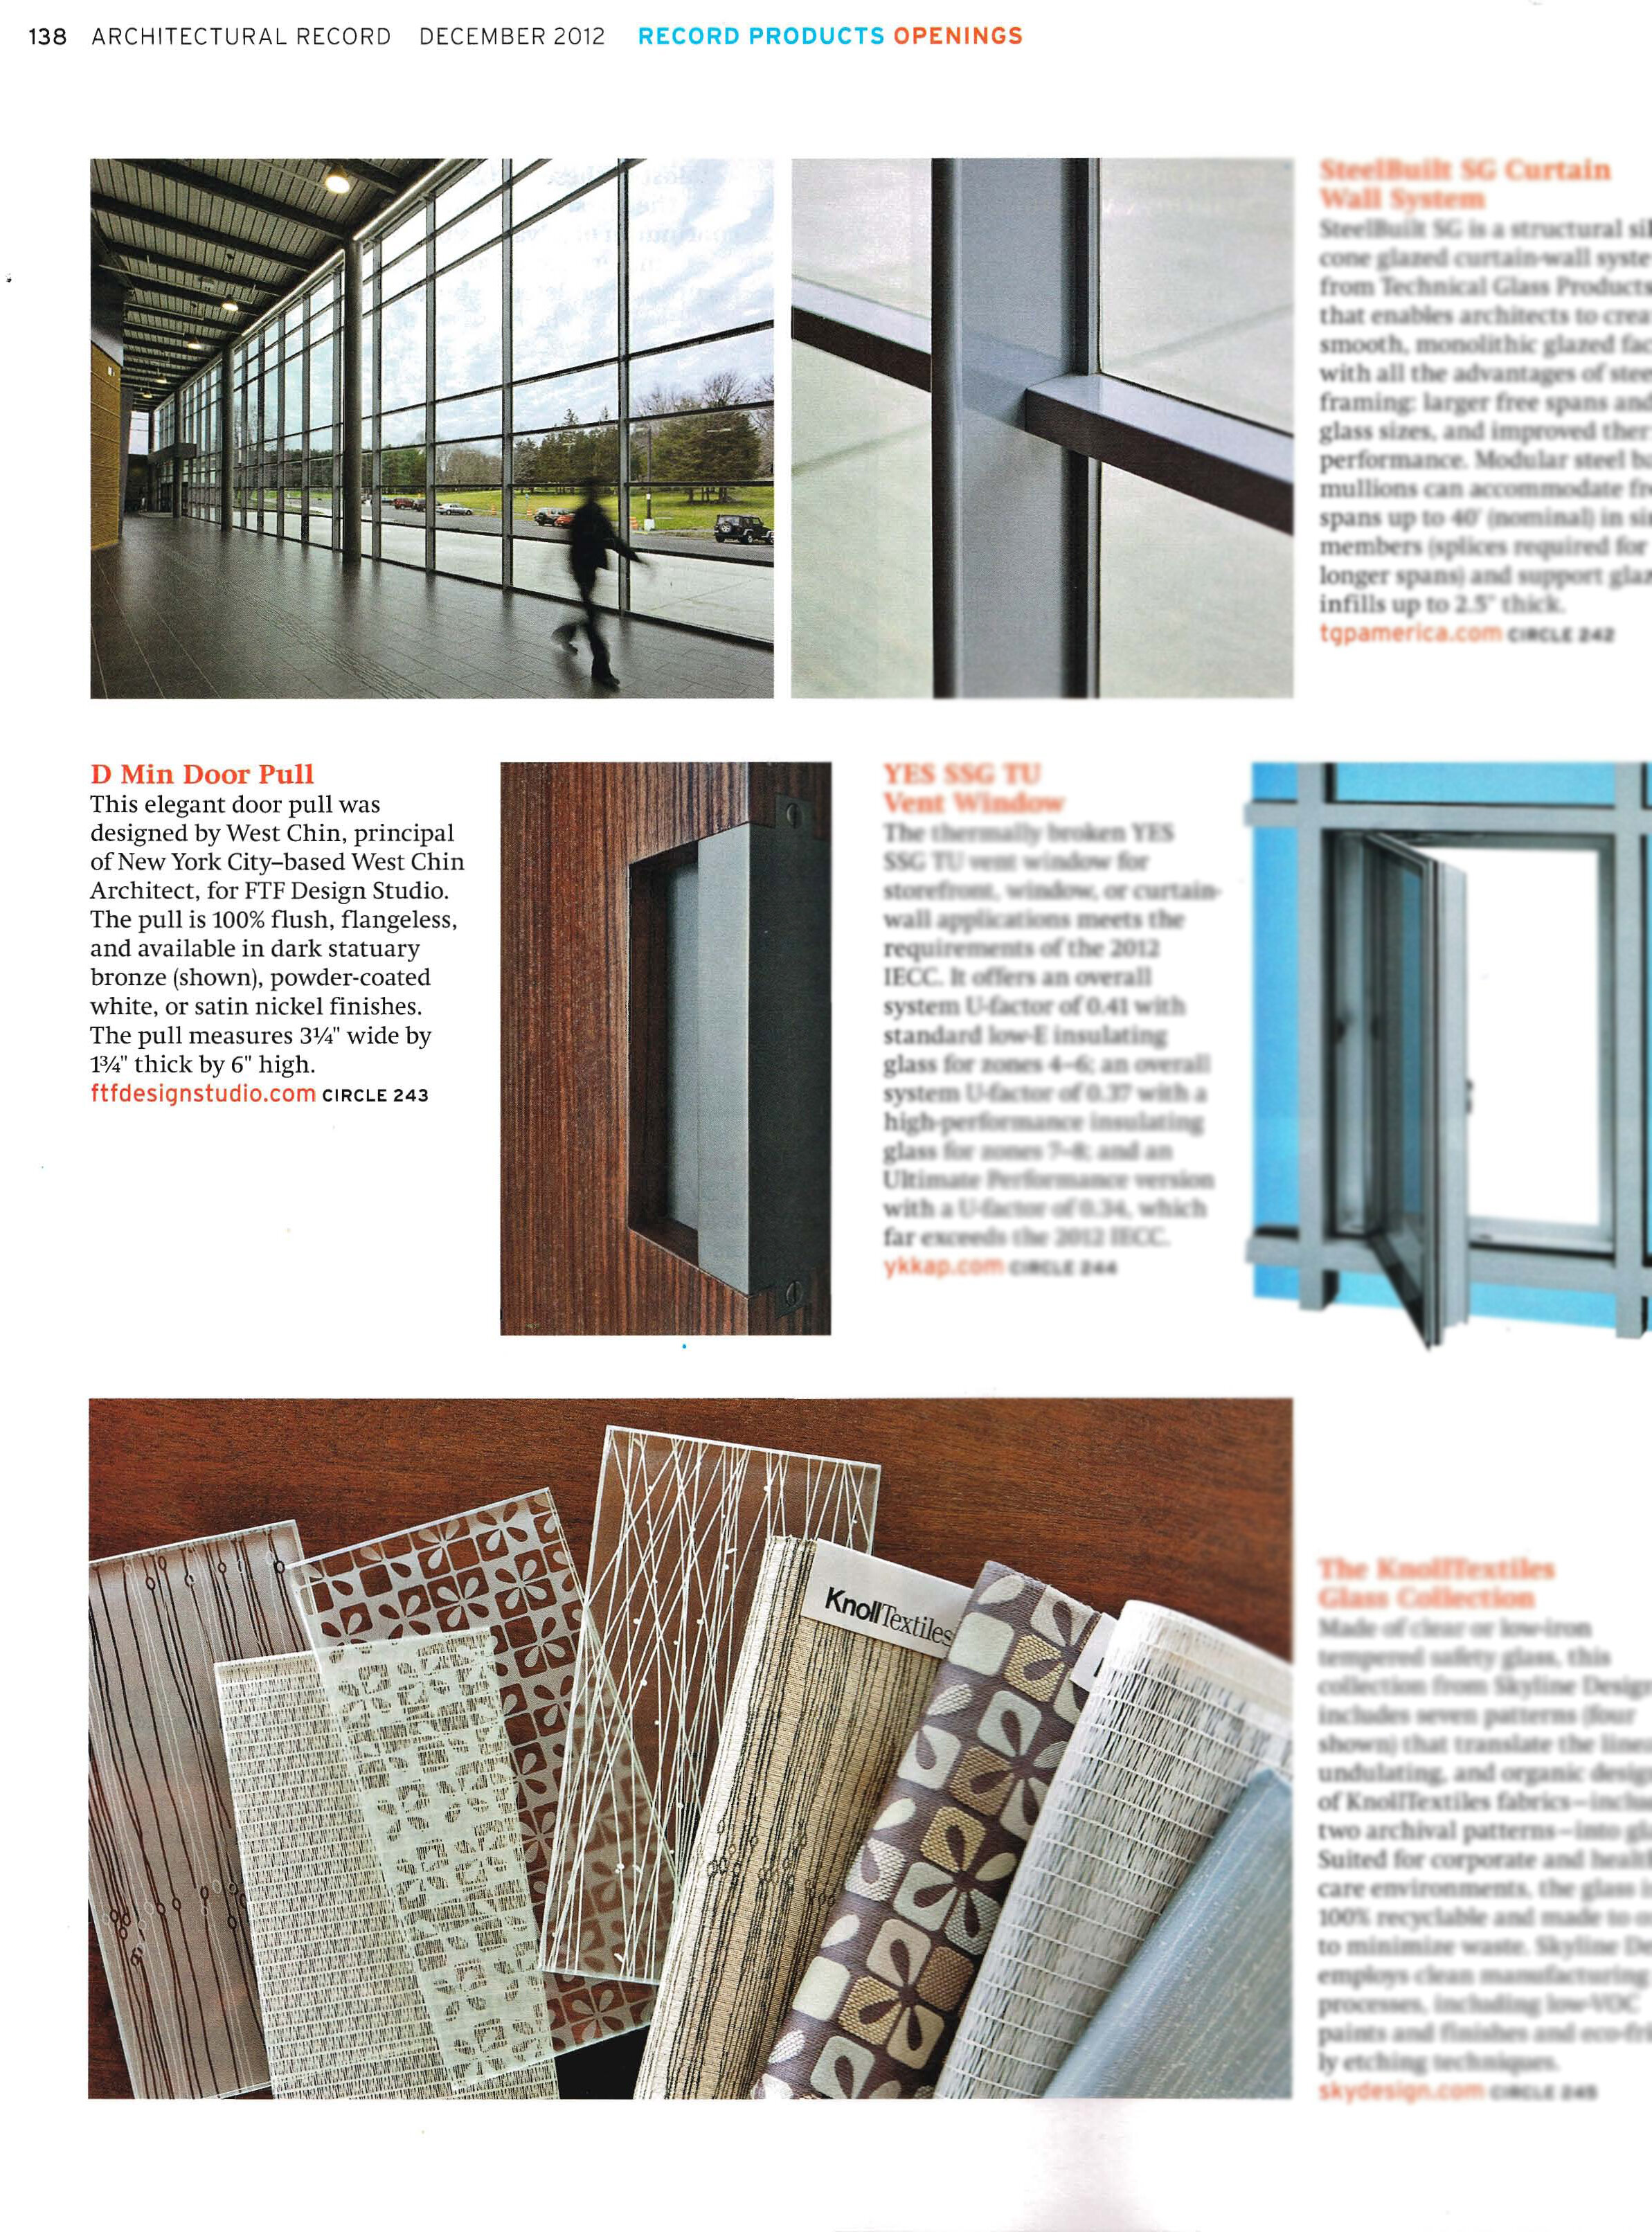 D Min door pull - Architectural Record - Record Products 2012_cropped & blurred.jpg